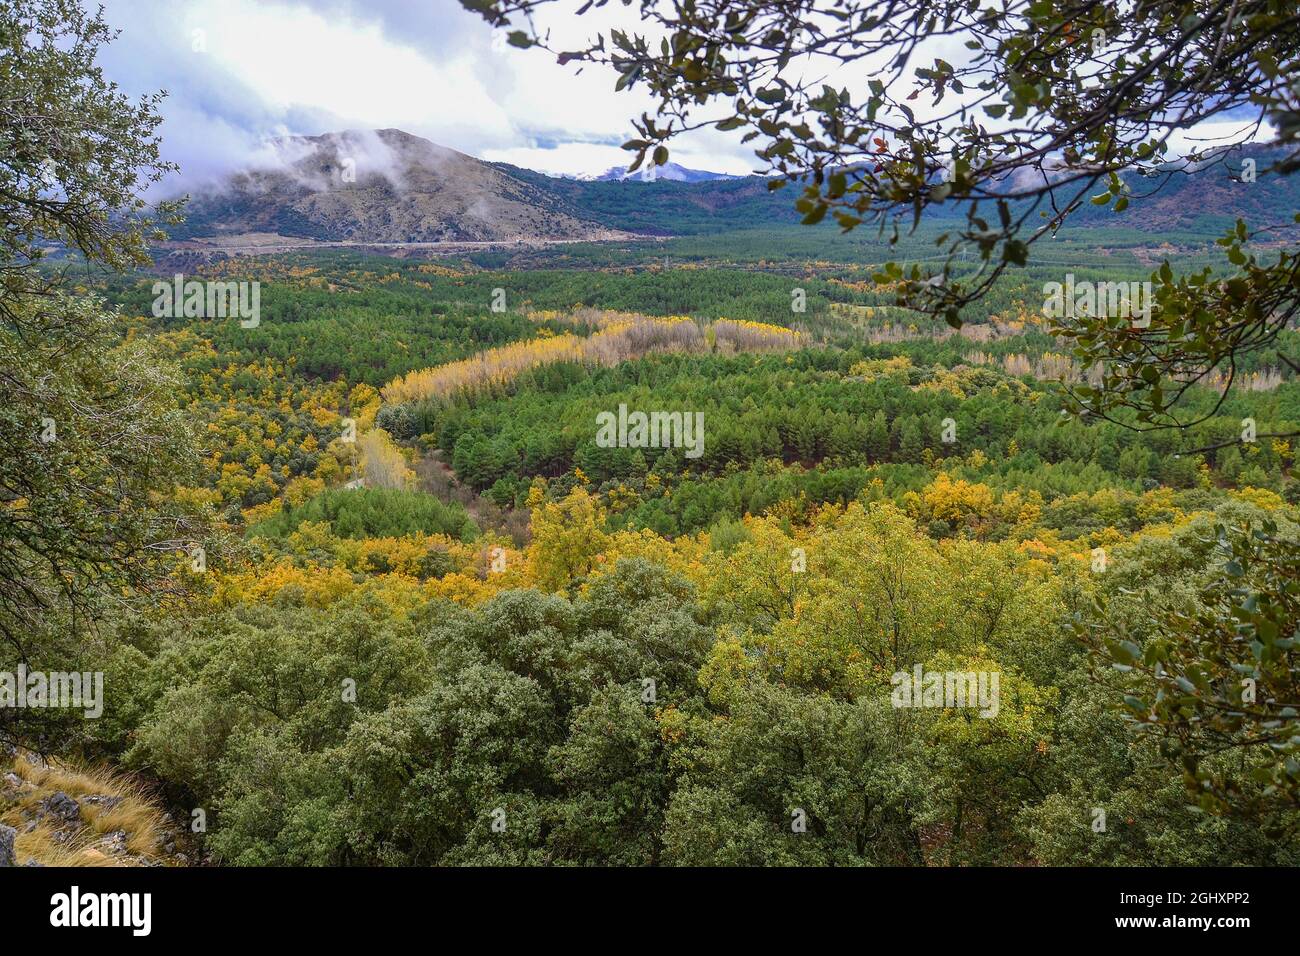 Autumn landscape seen from above from a trail in the Sierra of Huetor with green and yellow leaf trees, as well as mountains in the background with cl Stock Photo